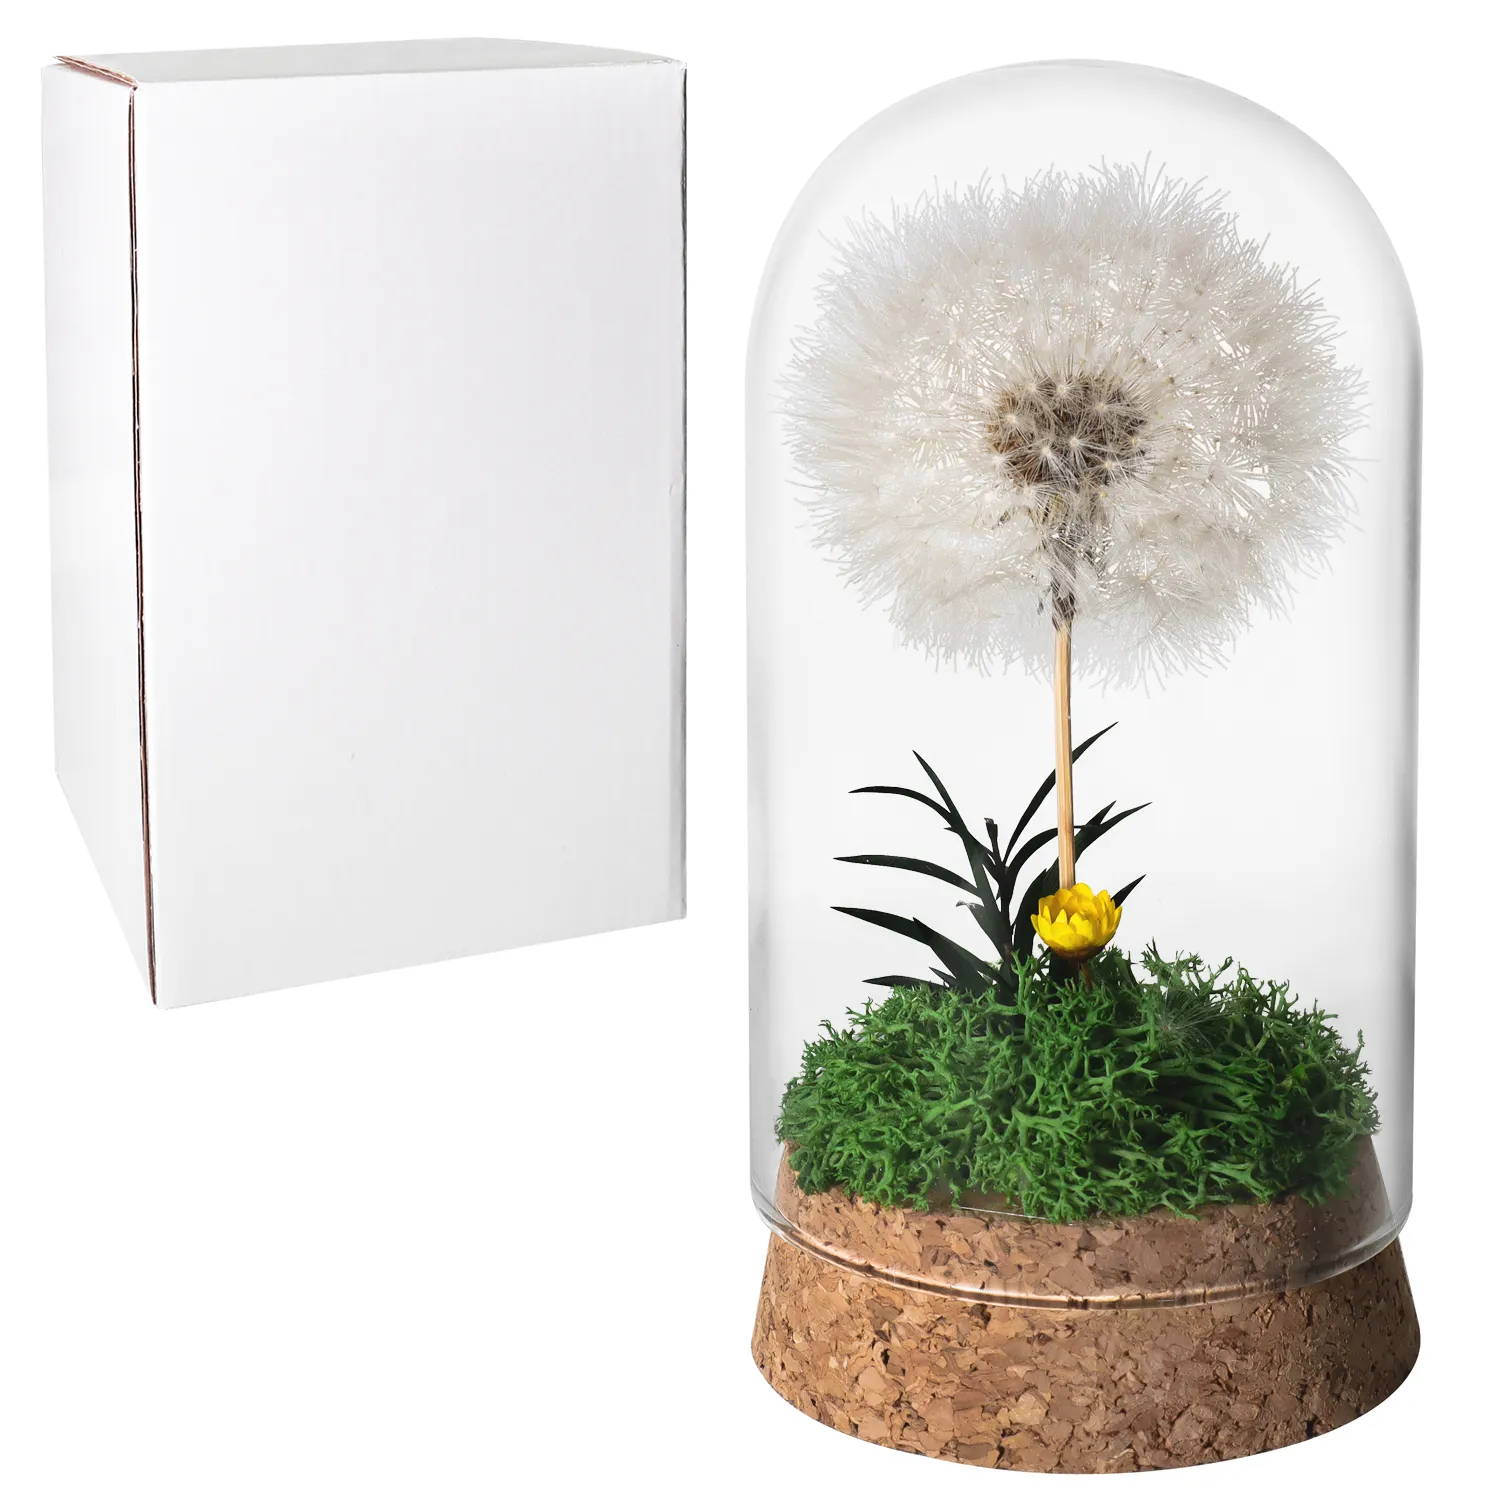 Christmas Valentines Day Gift Eternal Flower Home Decoration Preserved Dandelion in Glass Dome Gifts for Women Girls